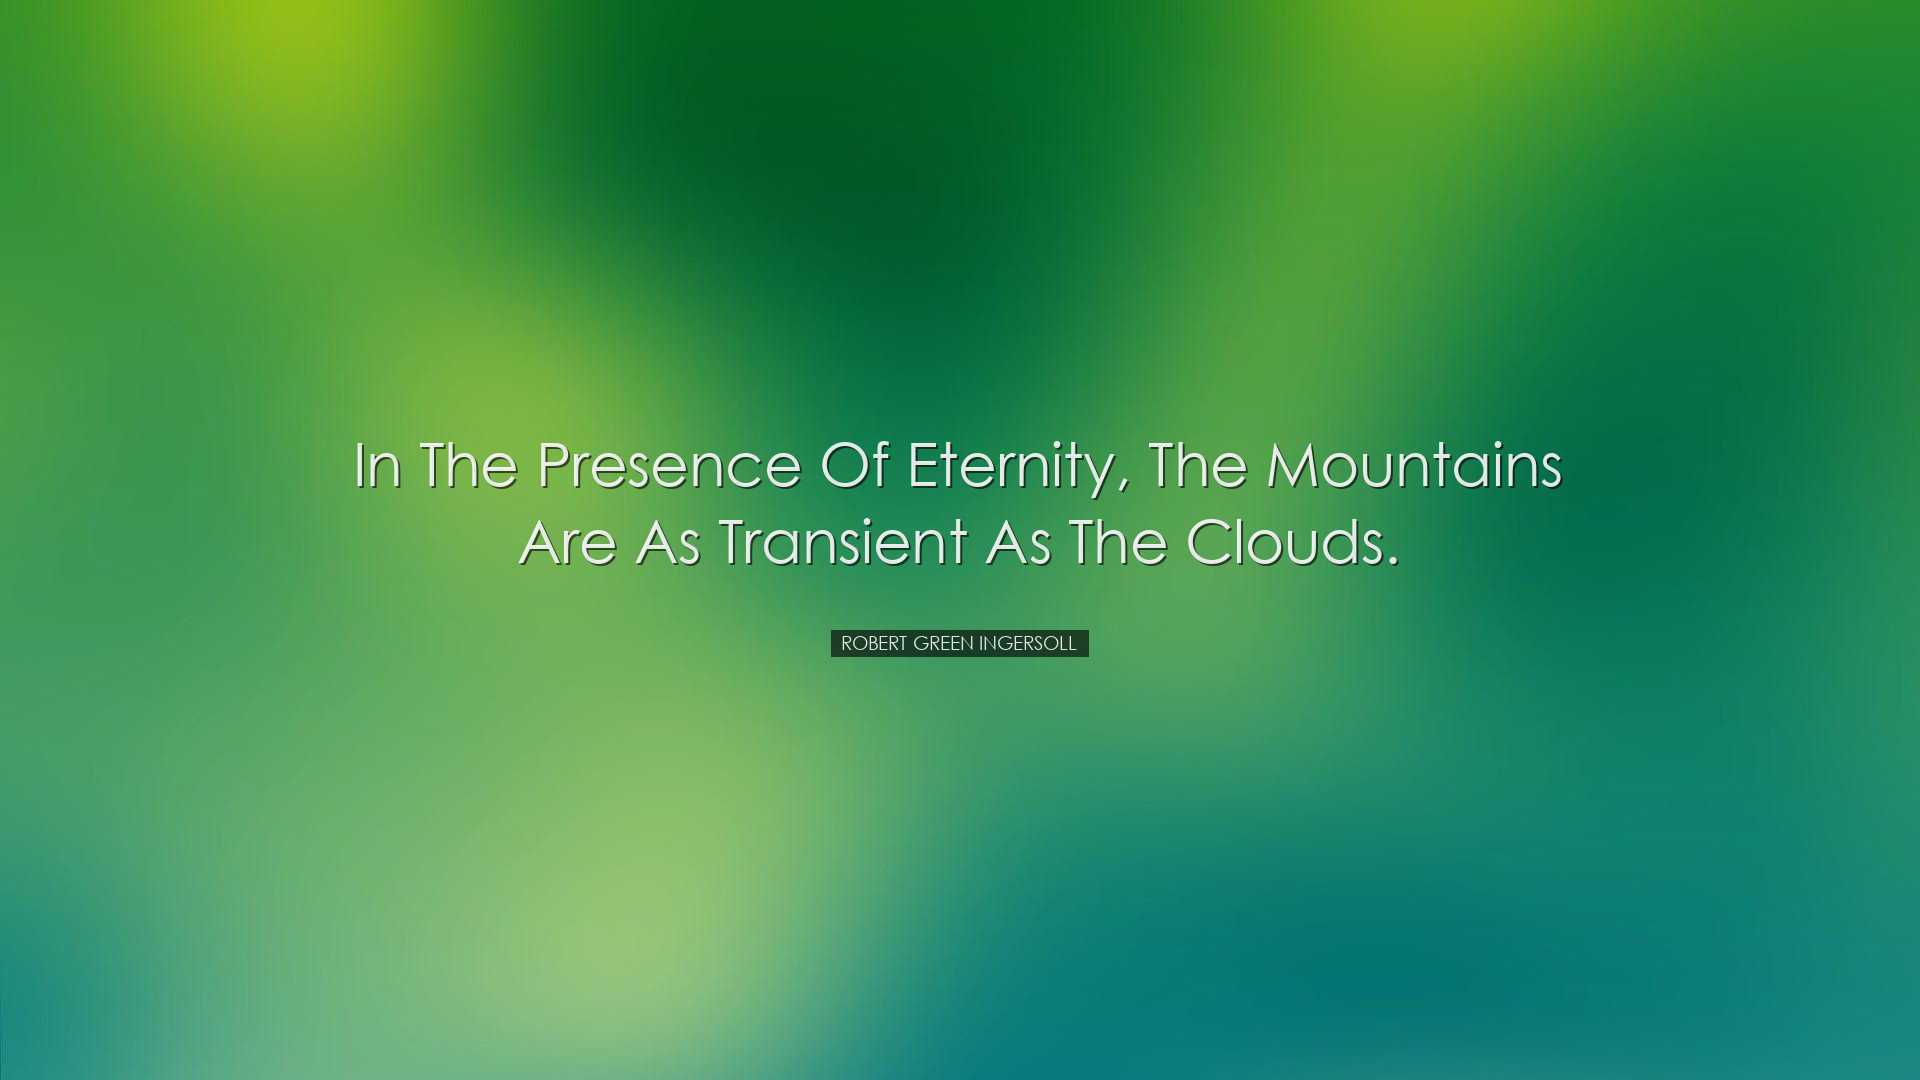 In the presence of eternity, the mountains are as transient as the